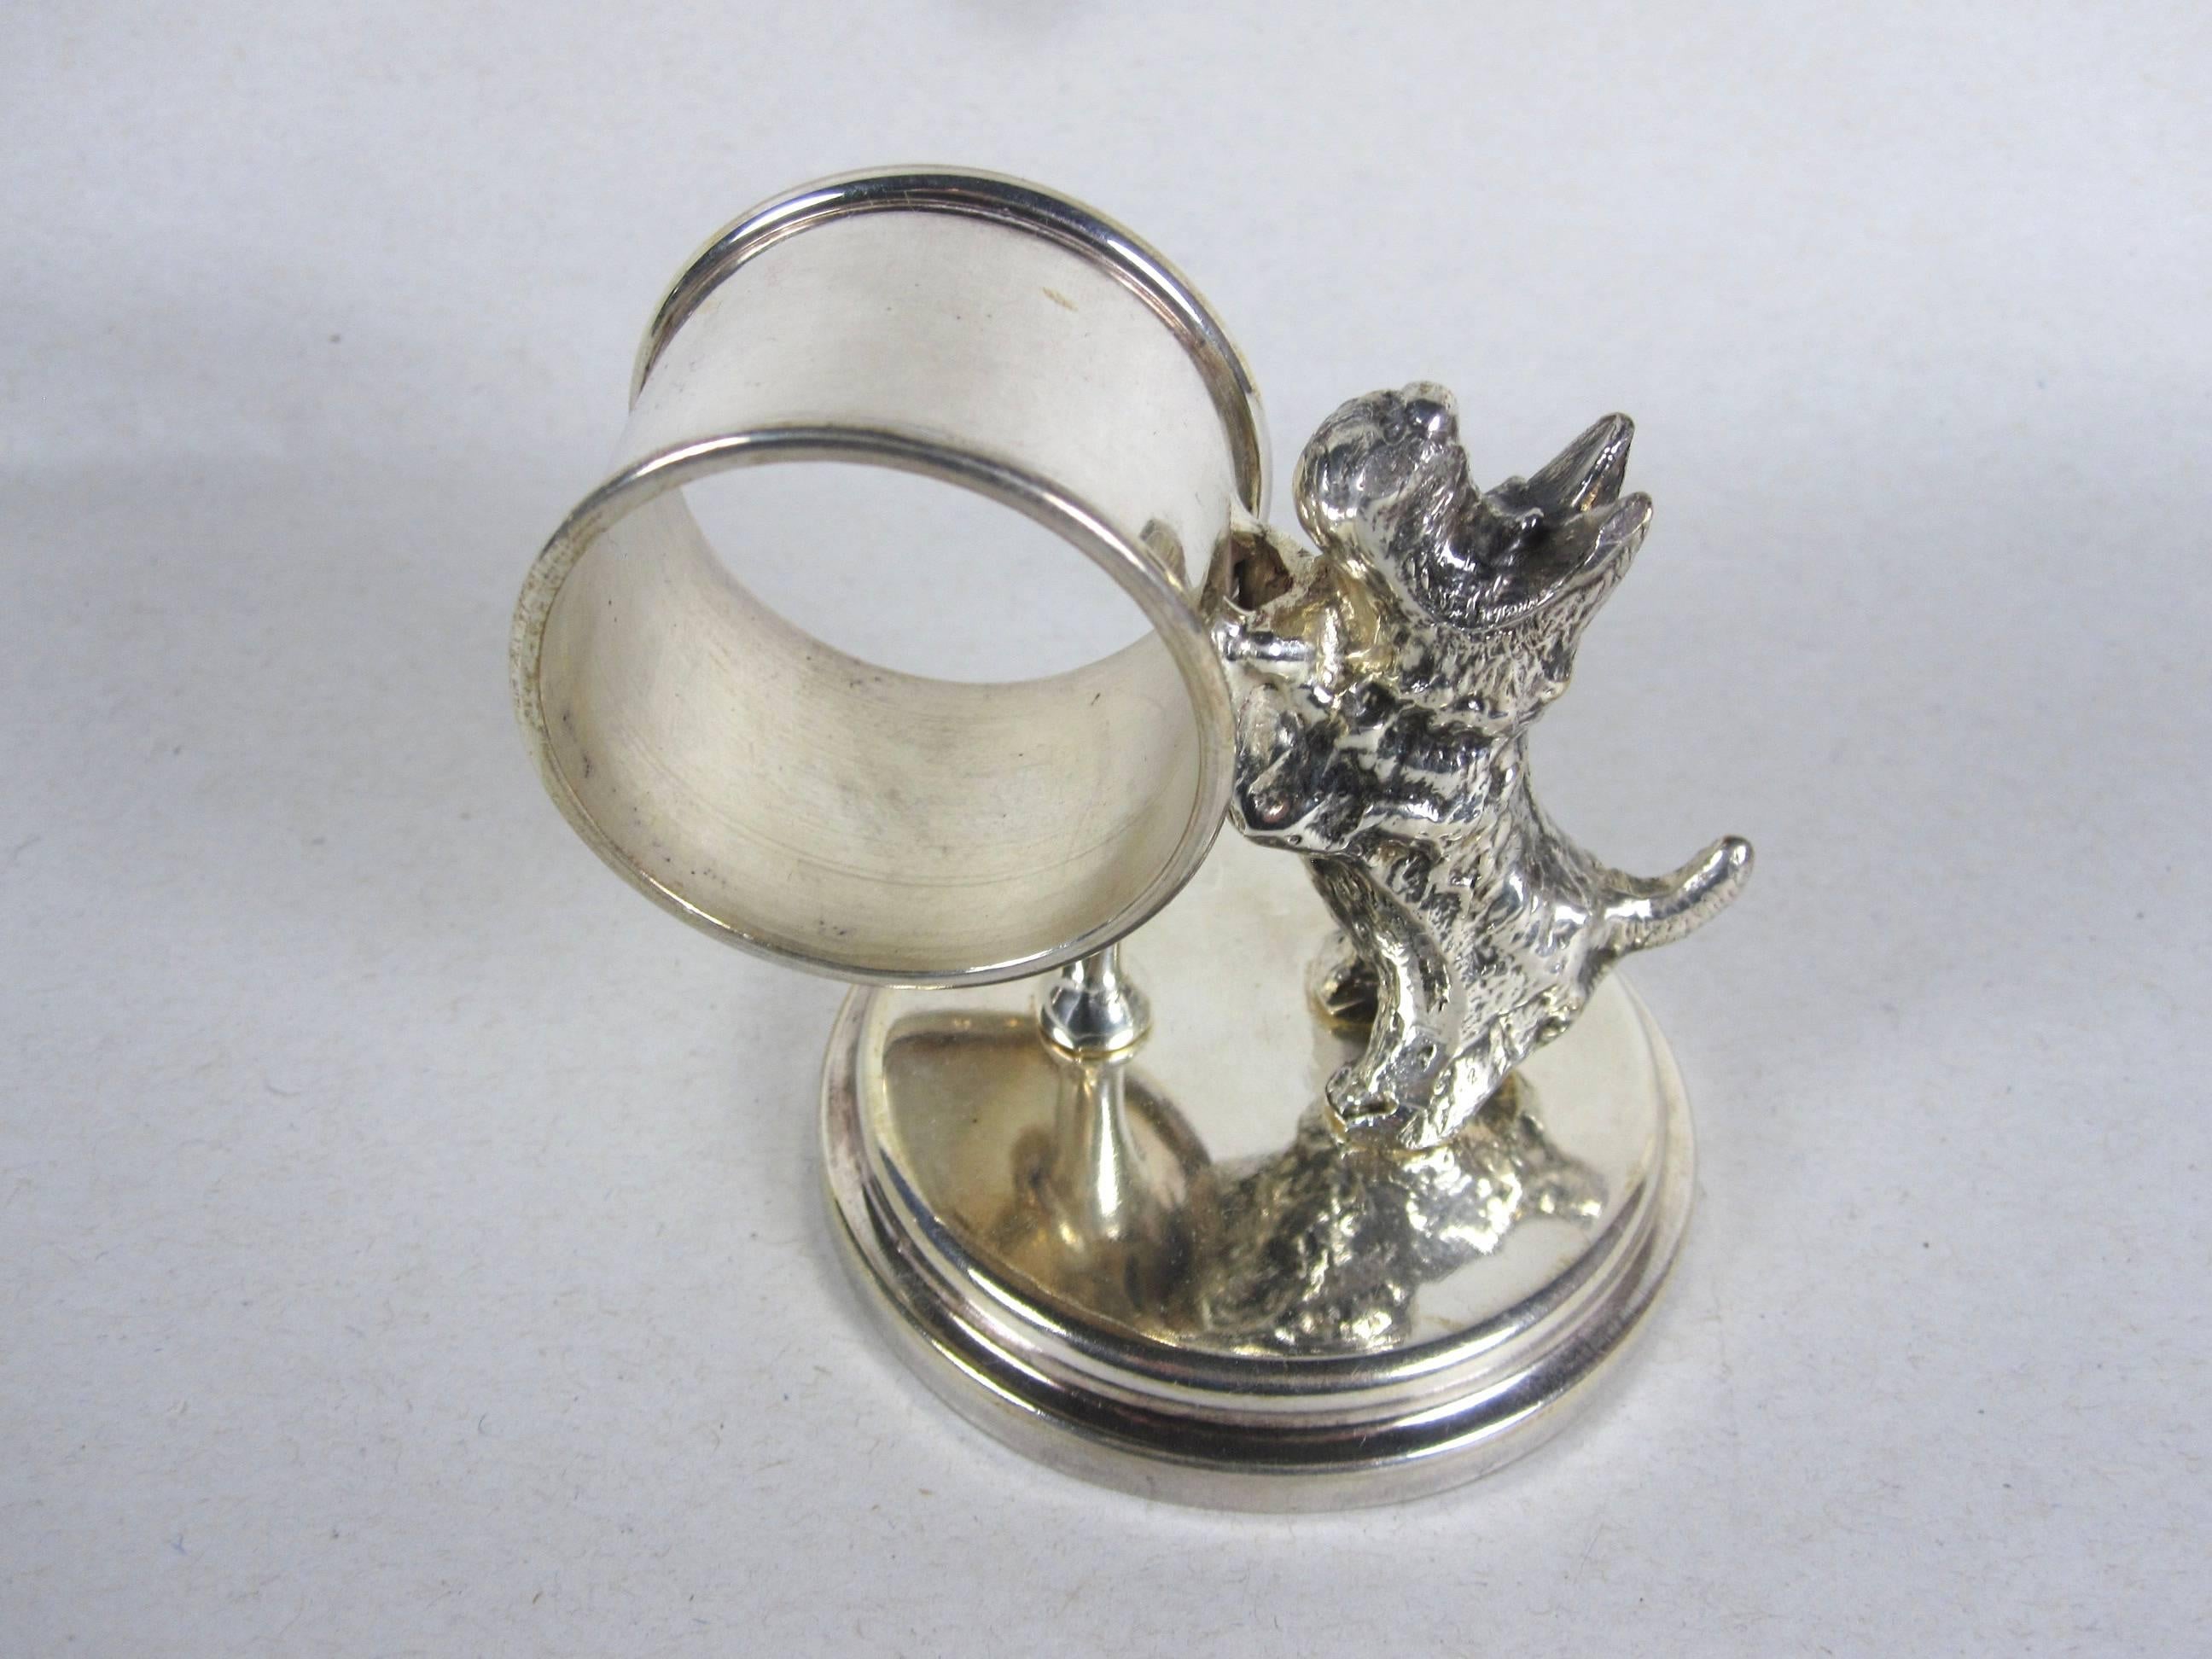 An antique Victorian Era Silver-plate standing napkin ring and place holder with a Scotty Dog rolling a barrel ring on a round rimmed base. 

Dating from 1890-1910. The dog and barrel stand are held in place with screws. Un-marked.

Heavy weight